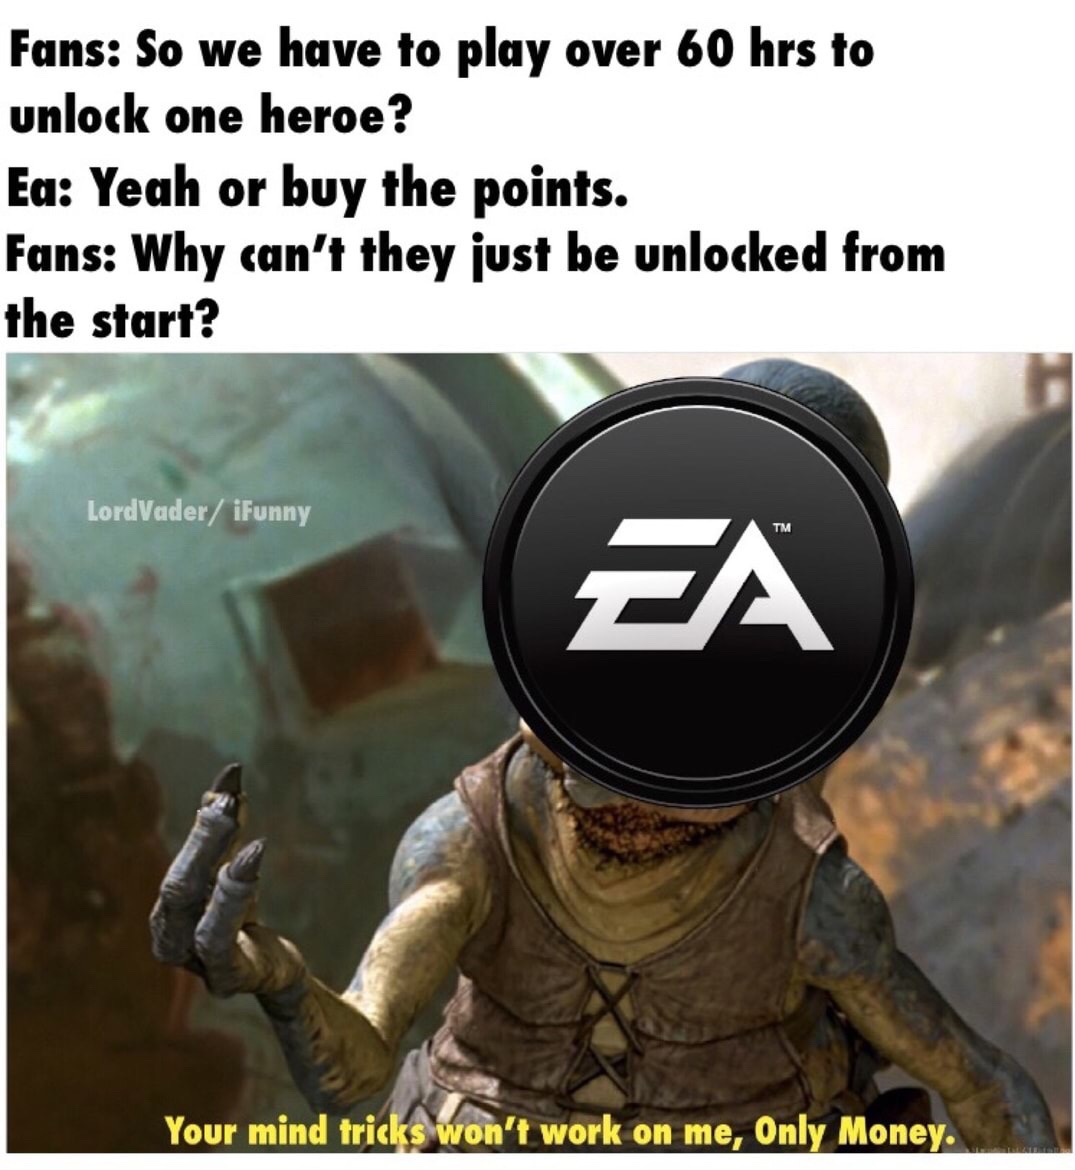 ea games - Fans So we have to play over 60 hrs to unlock one heroe? Ea Yeah or buy the points. Fans Why can't they just be unlocked from the start? LordVader iFunny Tm Your mind tricks won't work on me, Only Money.